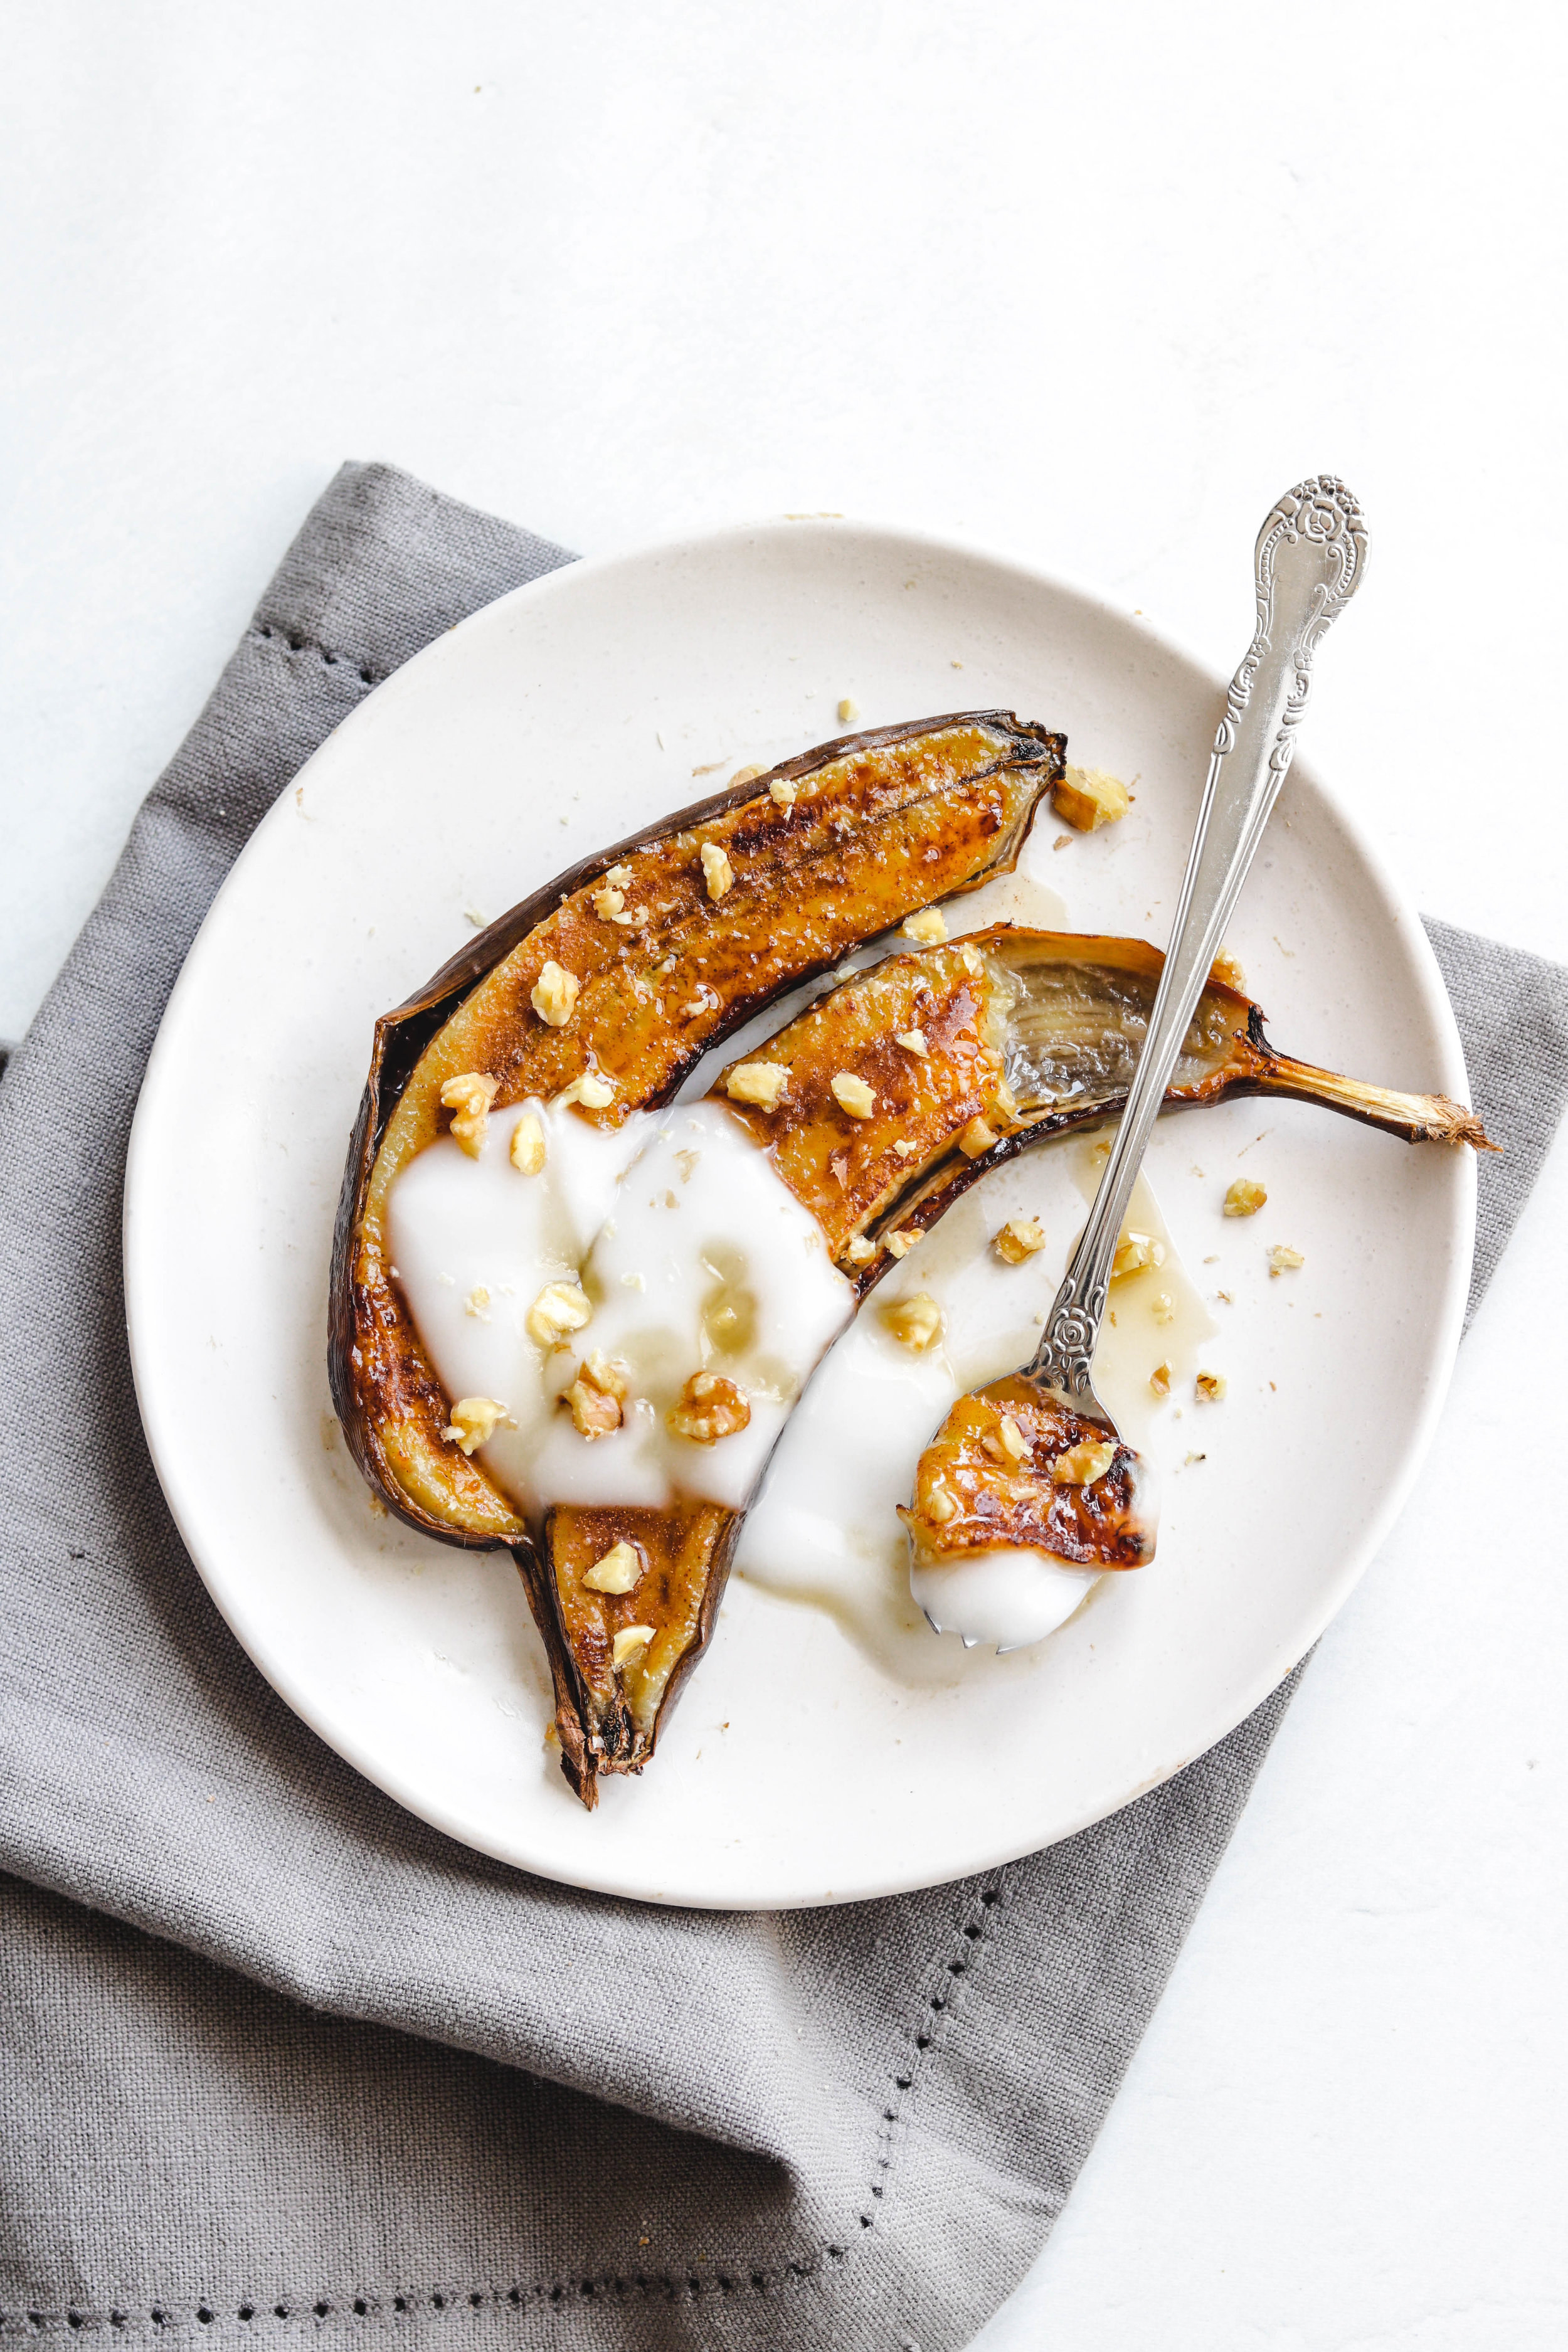 An air fried banana sliced in half and topped with yogurt and chopped nuts.